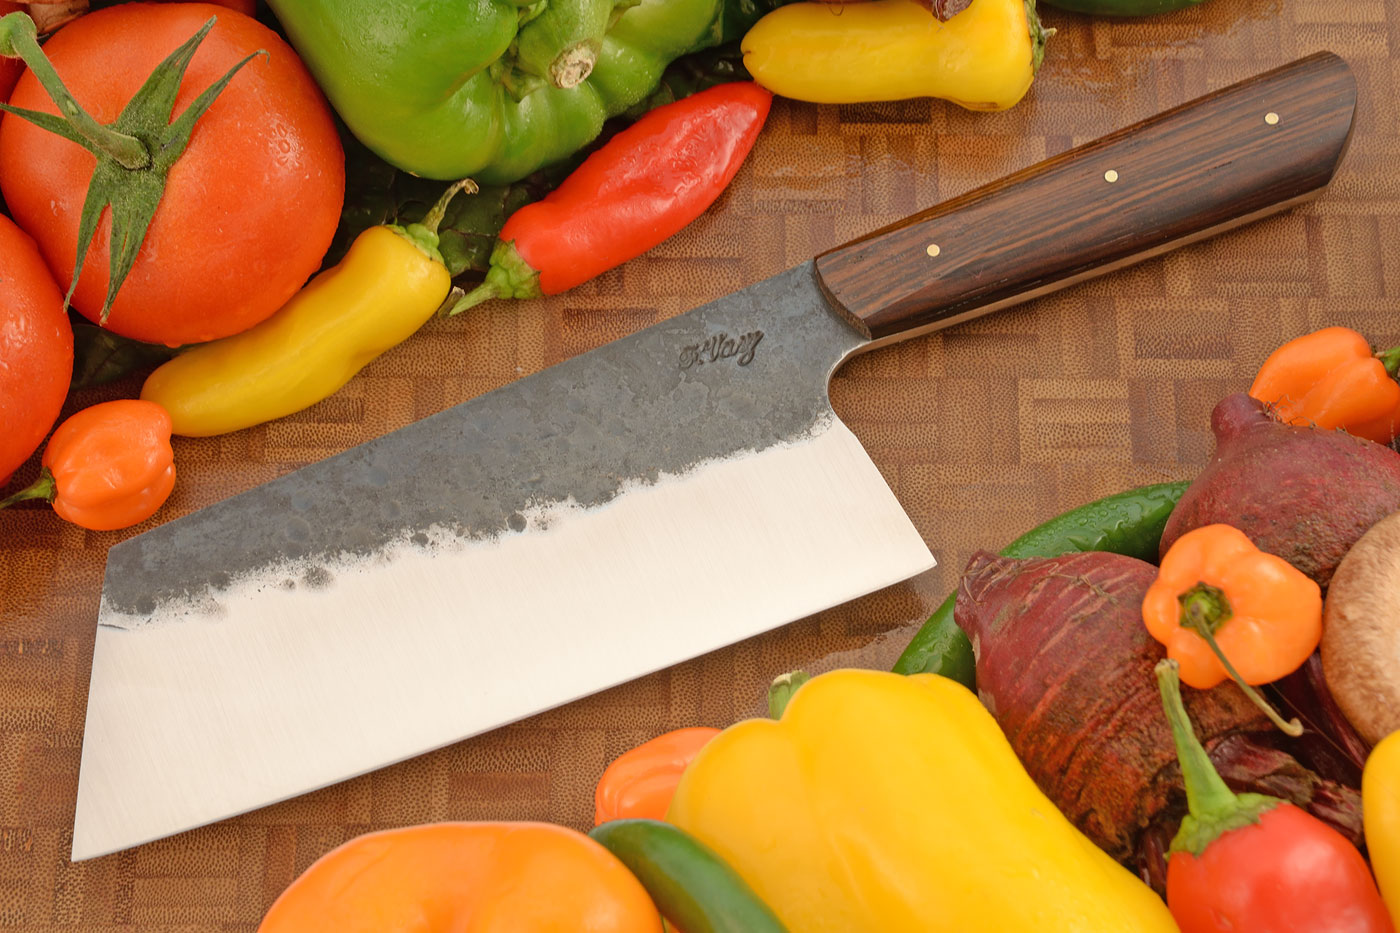 Chef's Cleaver with Kingwood